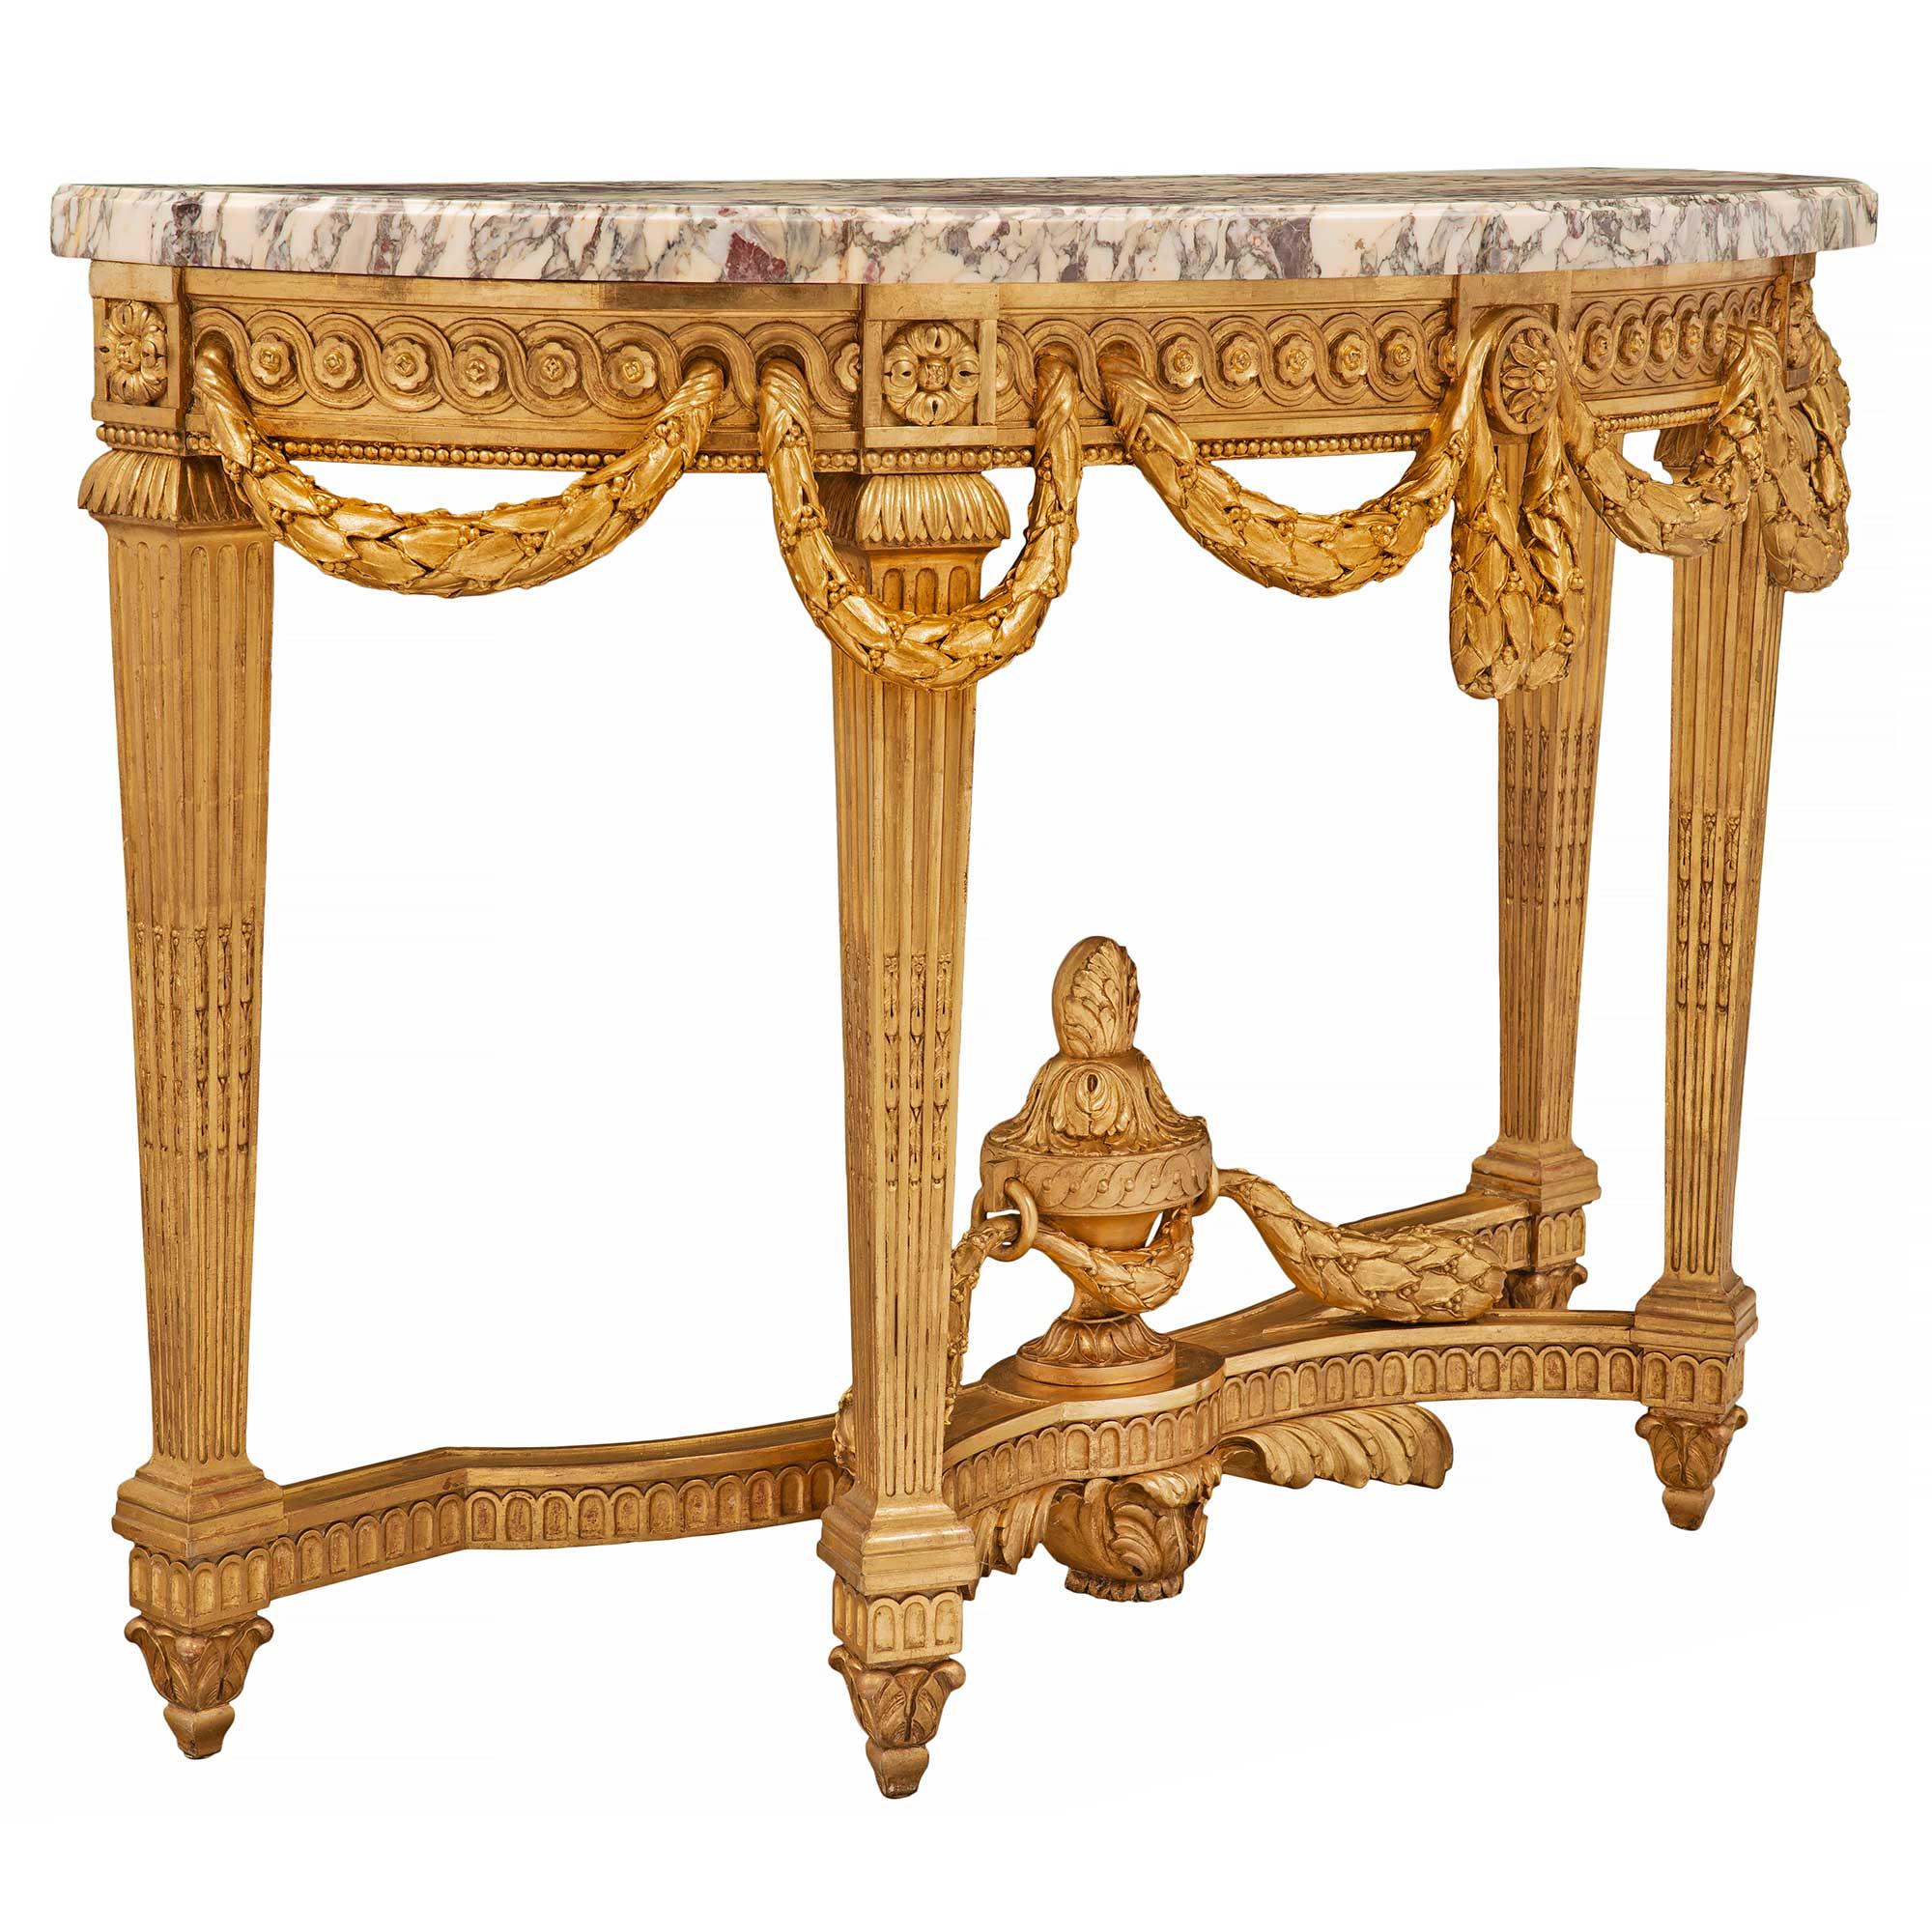 French 19th Century Louis XVI Style Giltwood and Fleur De Pêcher Marble Console In Good Condition For Sale In West Palm Beach, FL